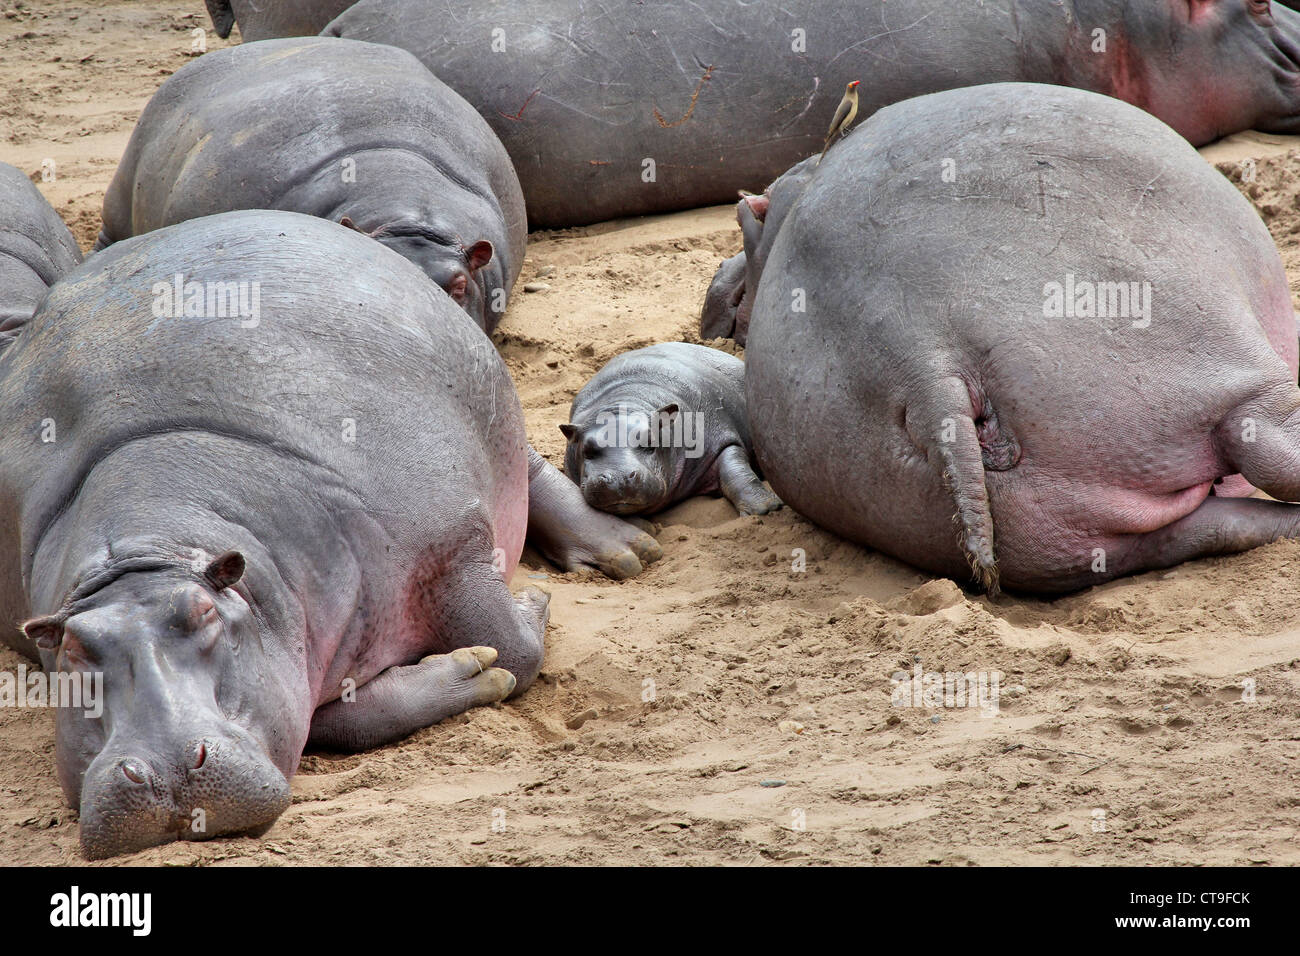 A Group of WILD Hippopotami (including a small baby!) in the Masai Mara, Kenya, Africa. Stock Photo